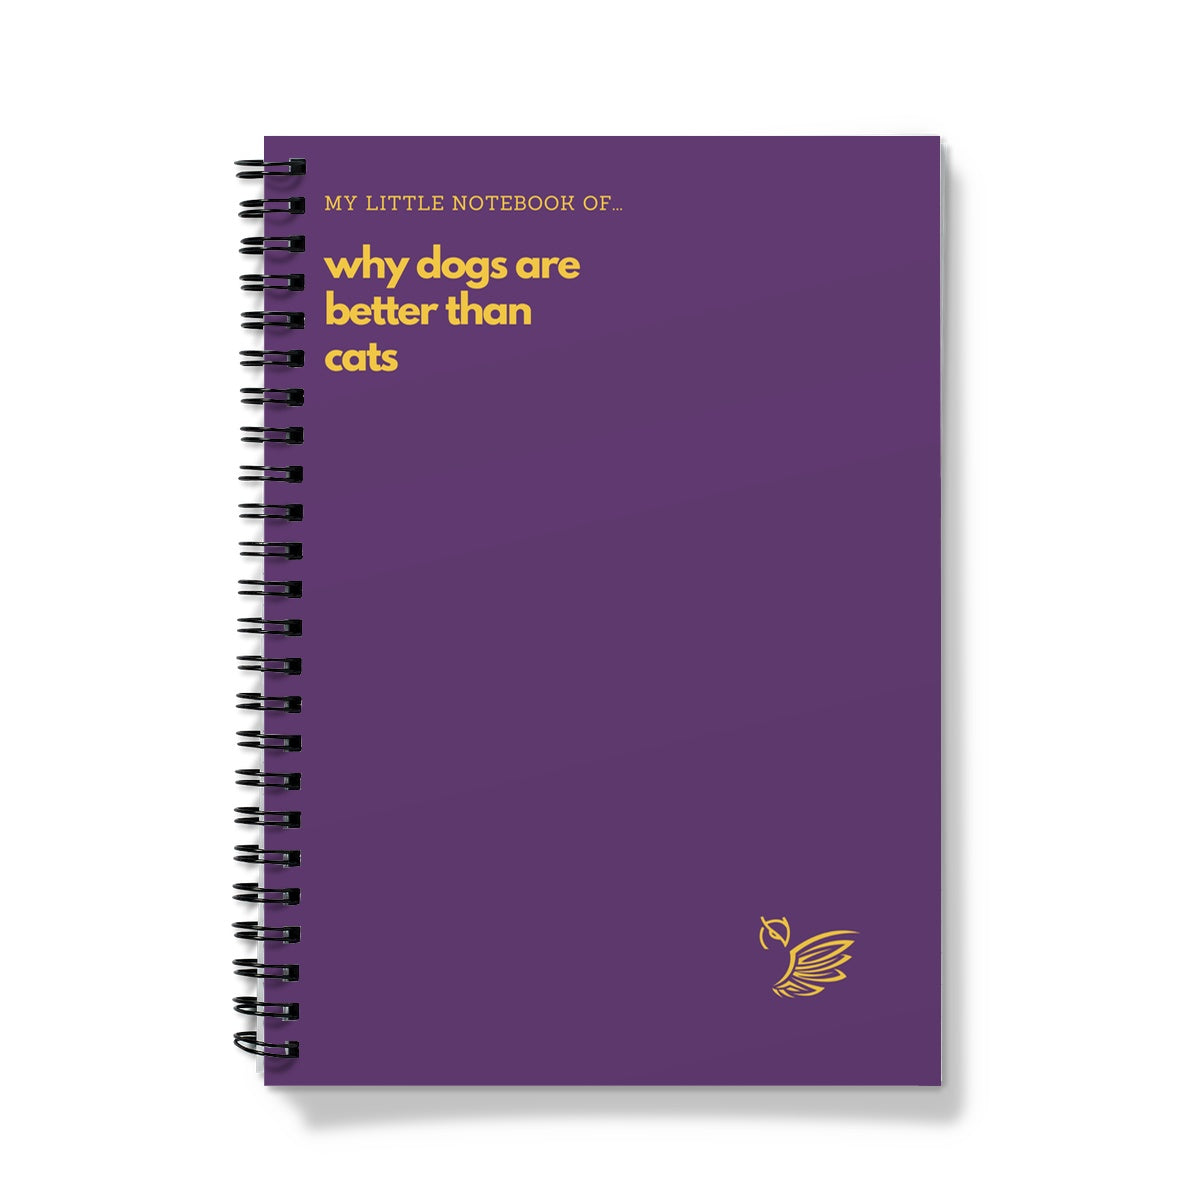 My Little Notebook Of... Why Dogs Are Better Than Cats Notebook